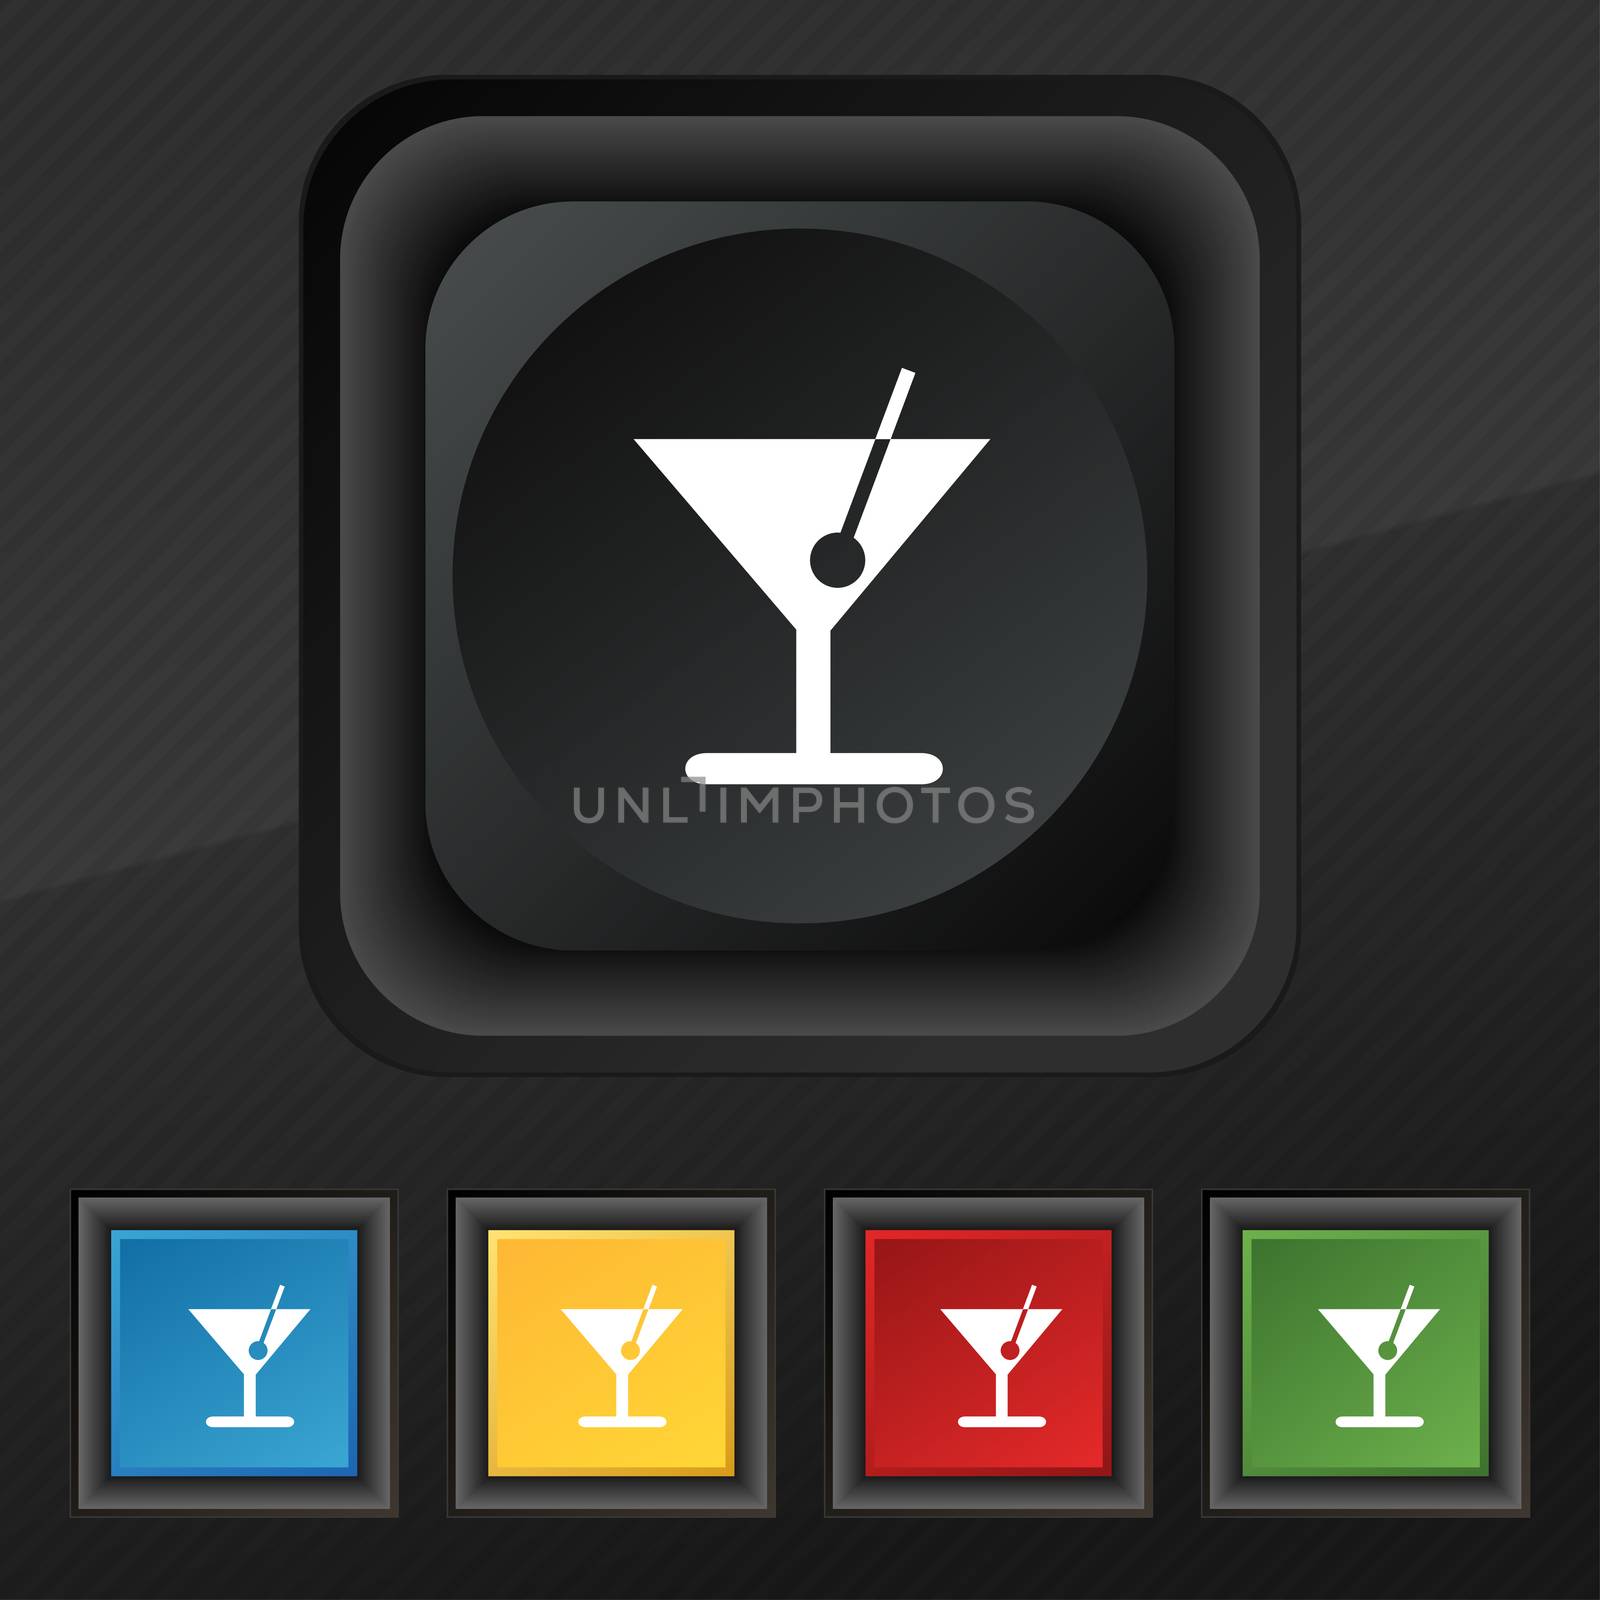 cocktail icon symbol. Set of five colorful, stylish buttons on black texture for your design. illustration